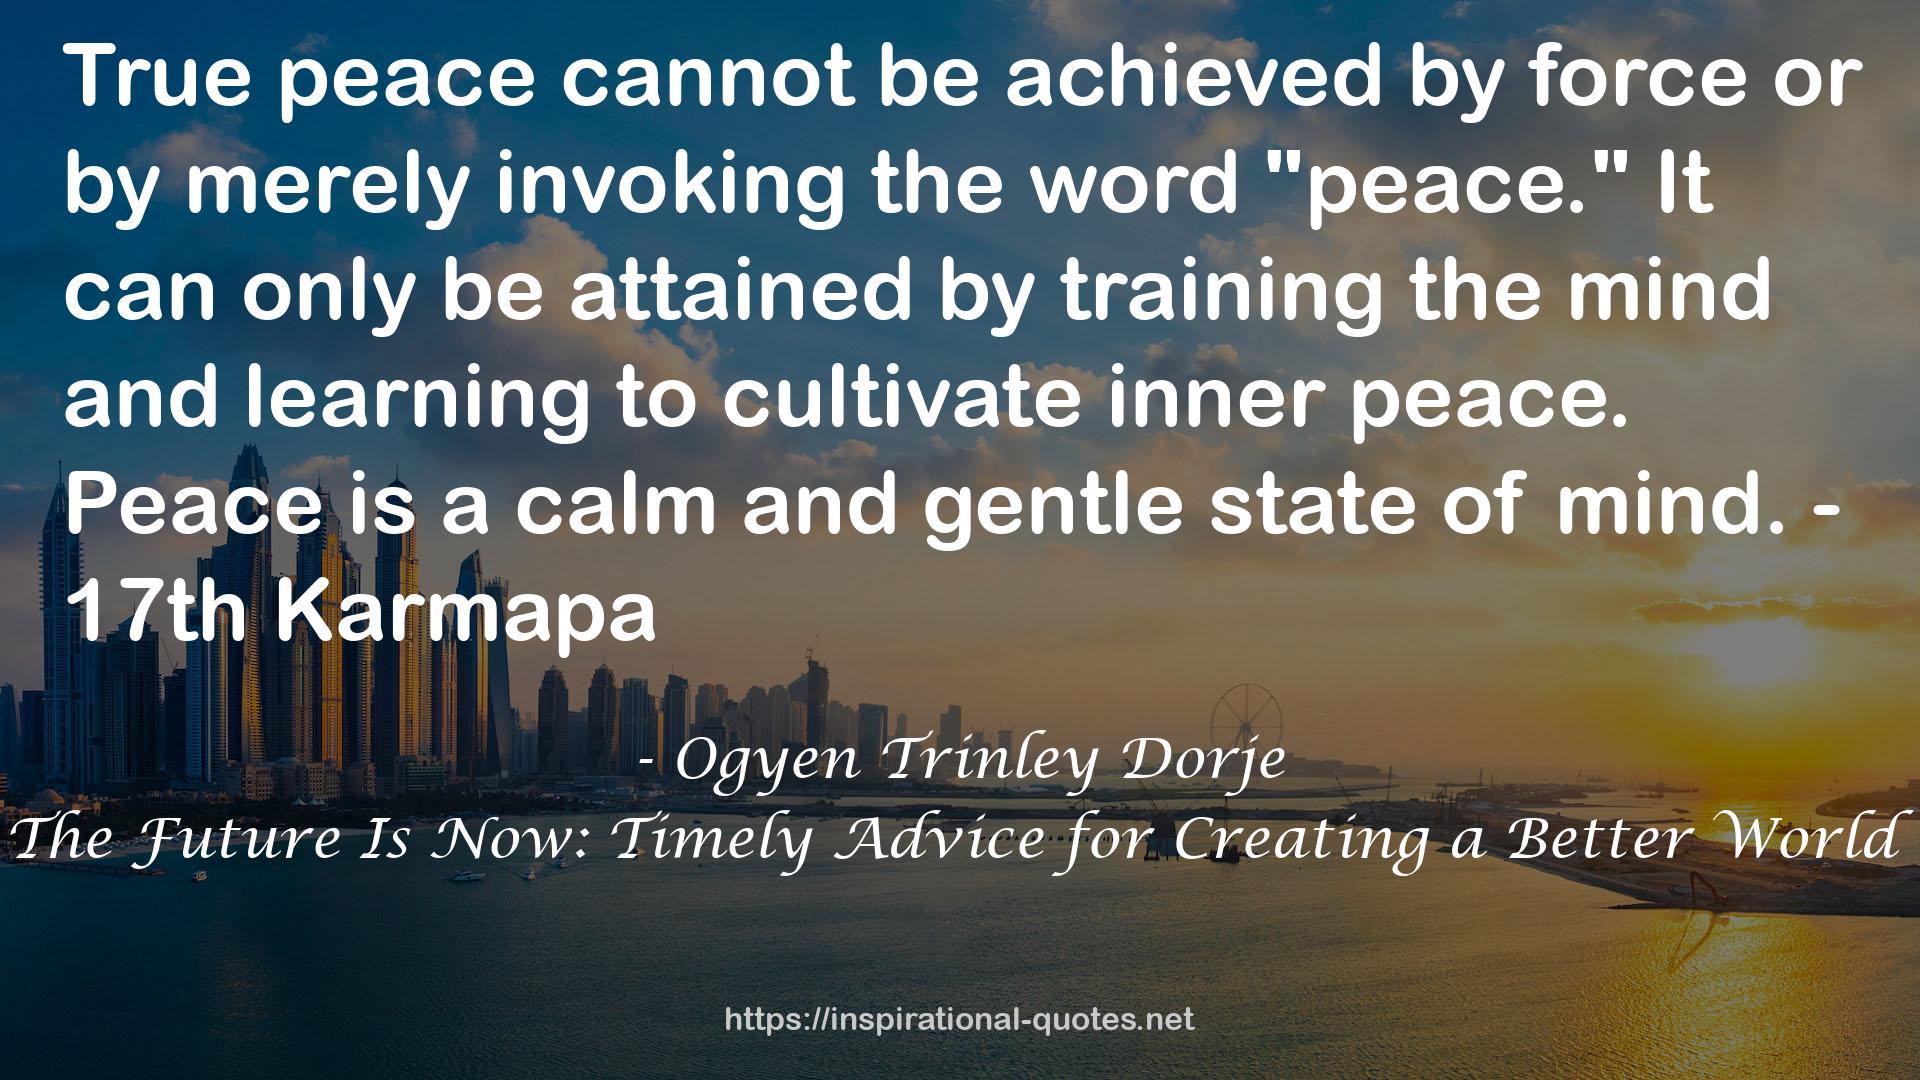 The Future Is Now: Timely Advice for Creating a Better World QUOTES